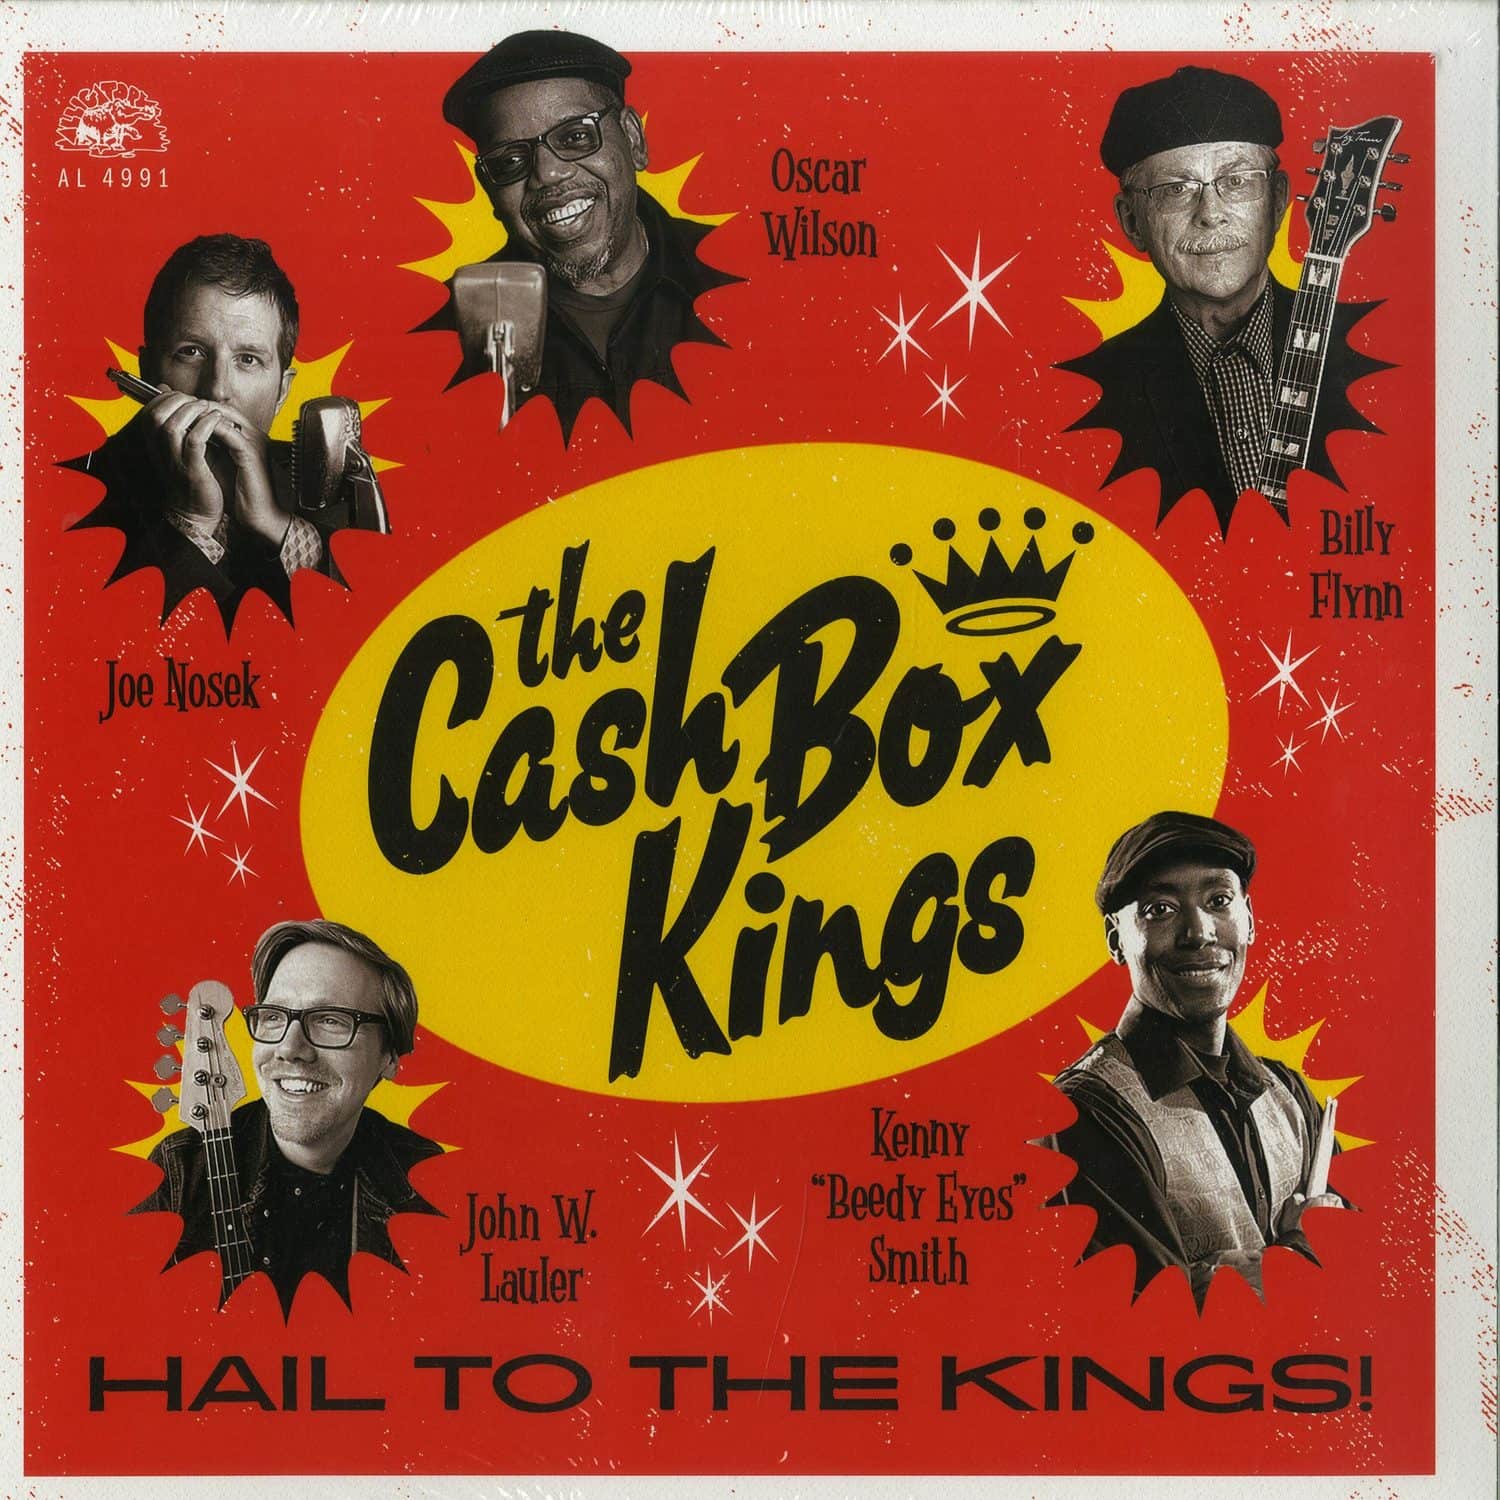 The Cash Box Kings - HAIL TO THE KINGS! 